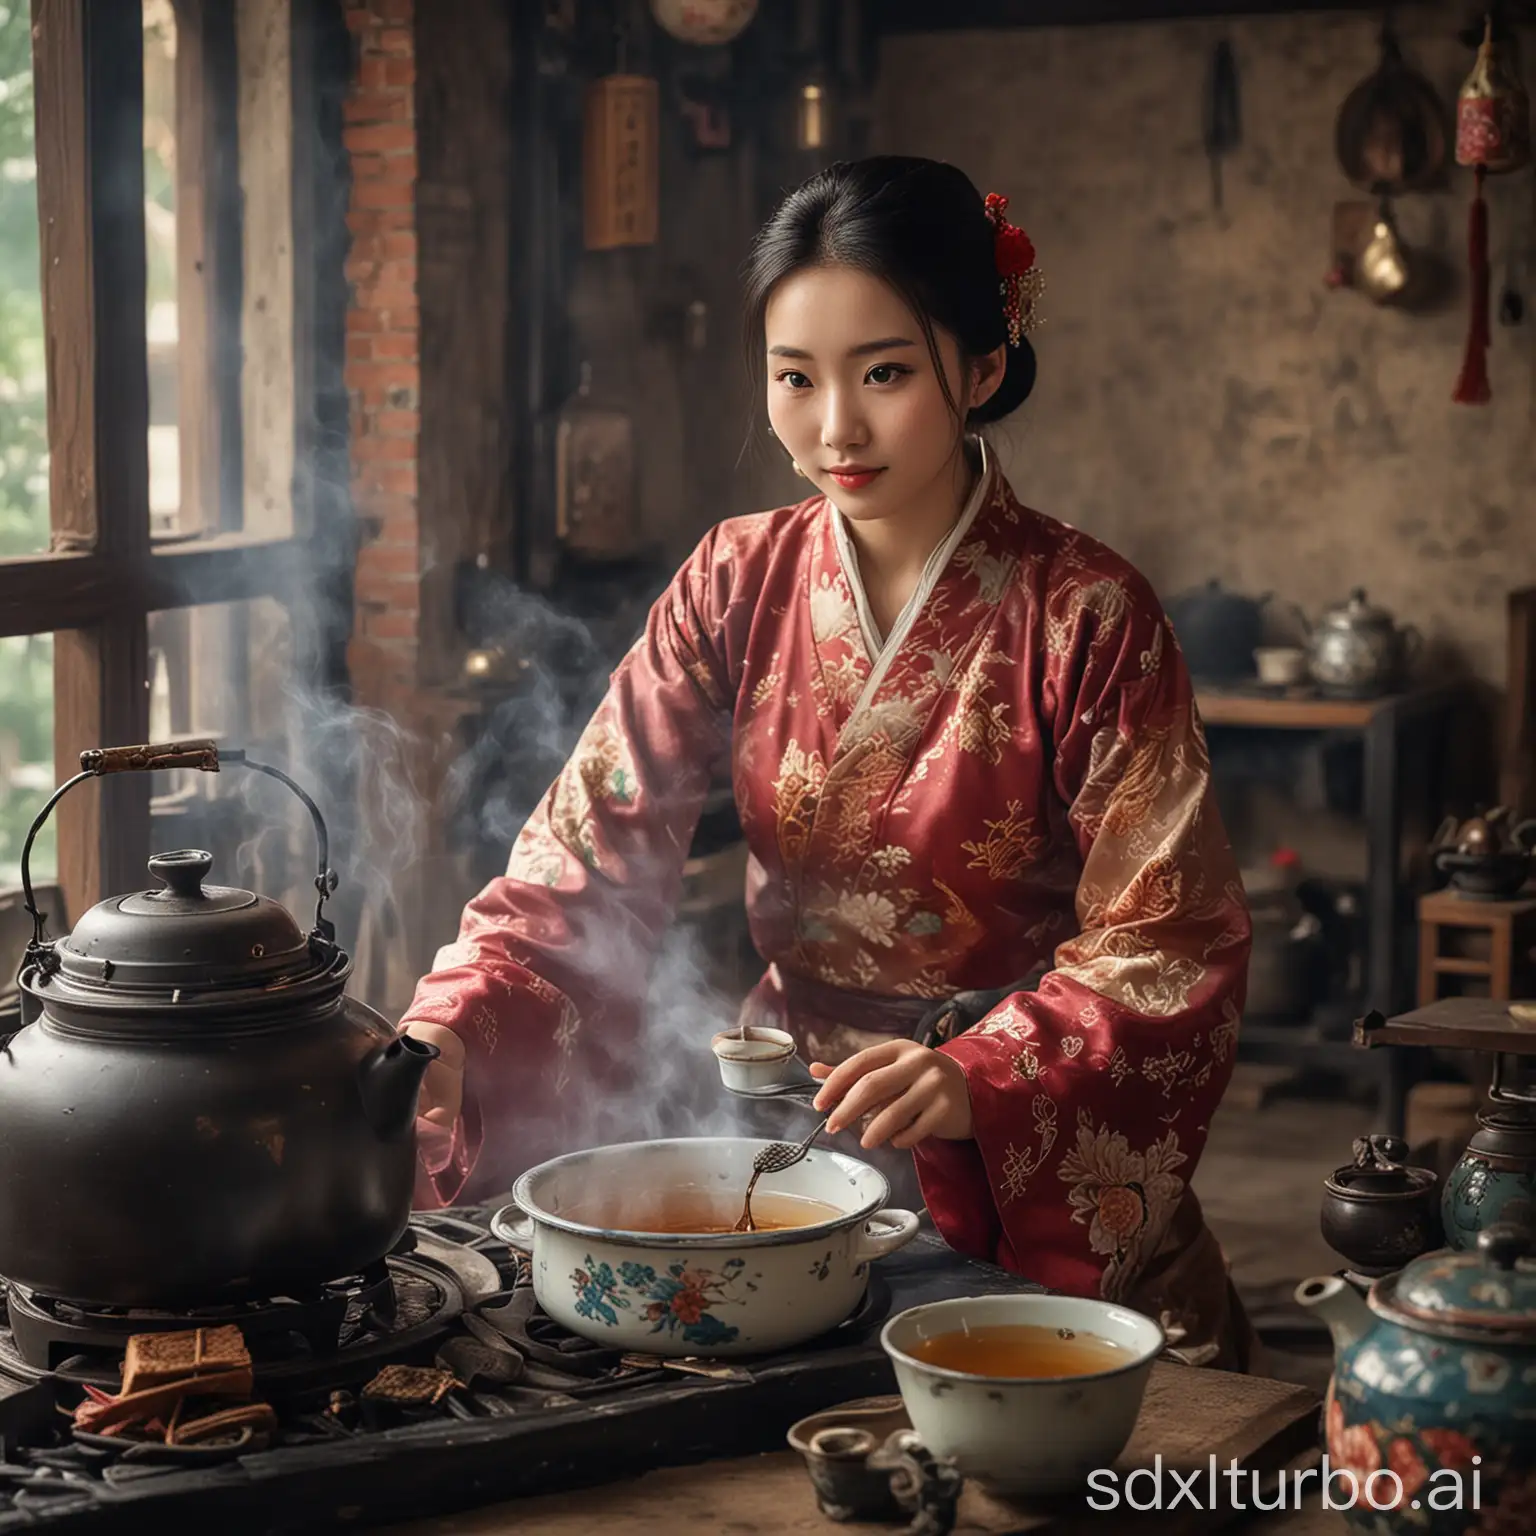 A Chinese beauty, in a very beautiful place, around the stove boiling tea, how comfortable